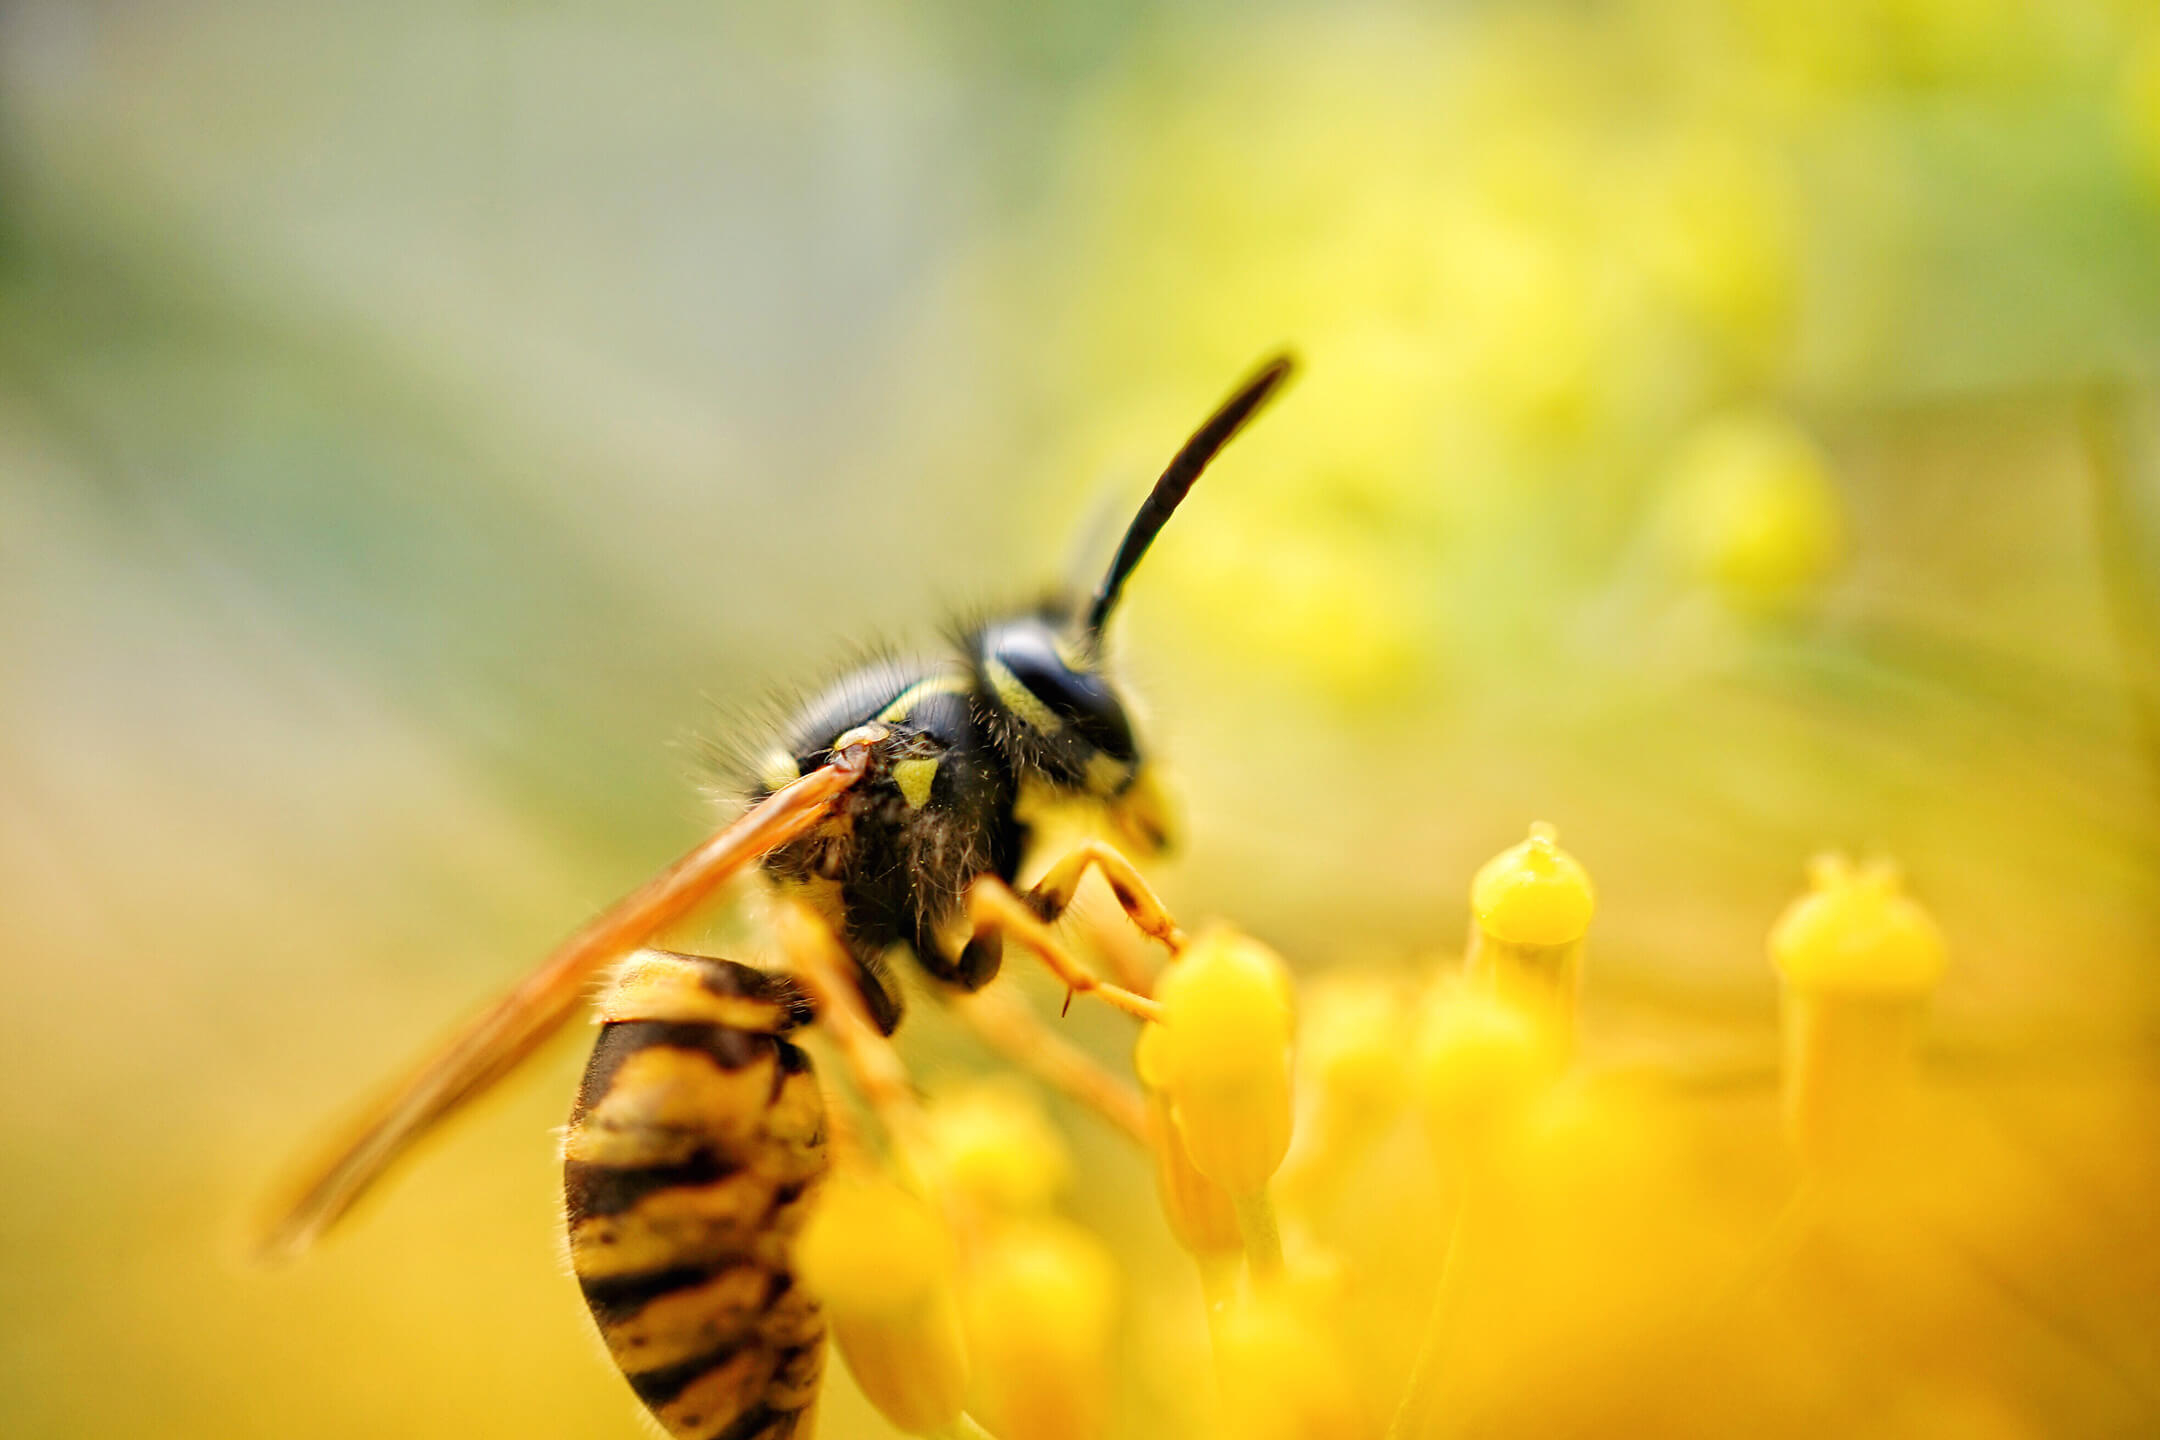 a-close-up-of-a-wasp-on-a-yellow-flower-with-a-sof-1080px